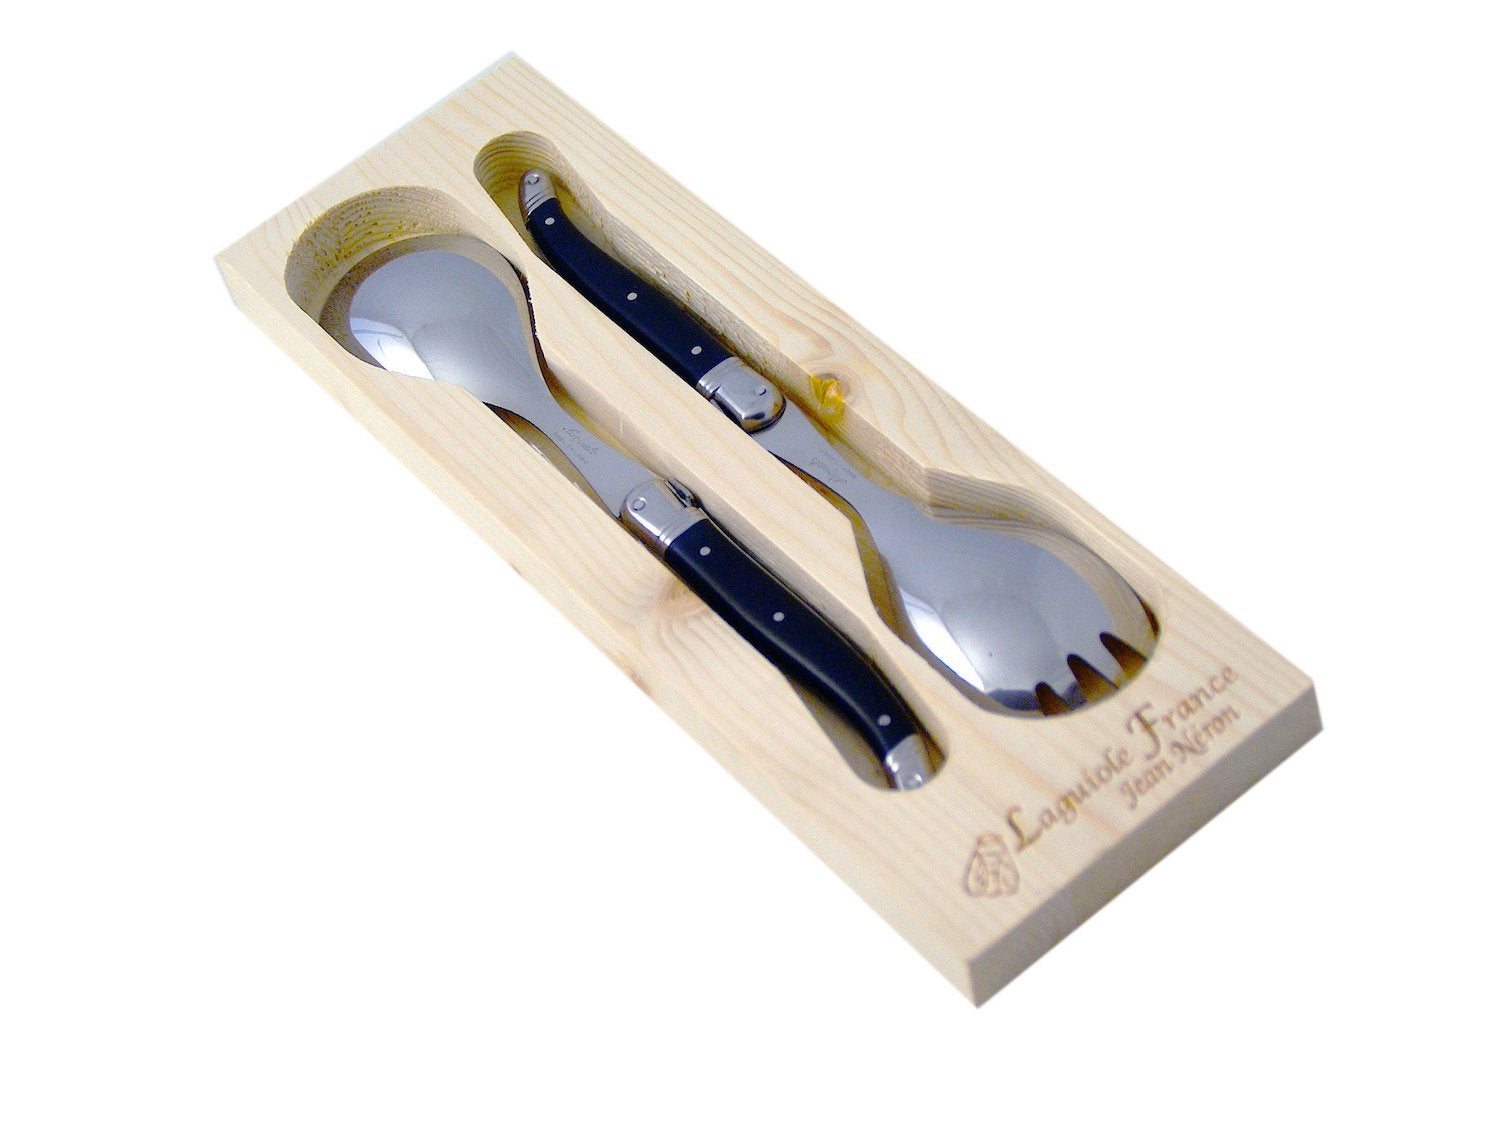 Jean Neron Laguiole Black Salad Serving Set in Wood Box - French Dry Goods